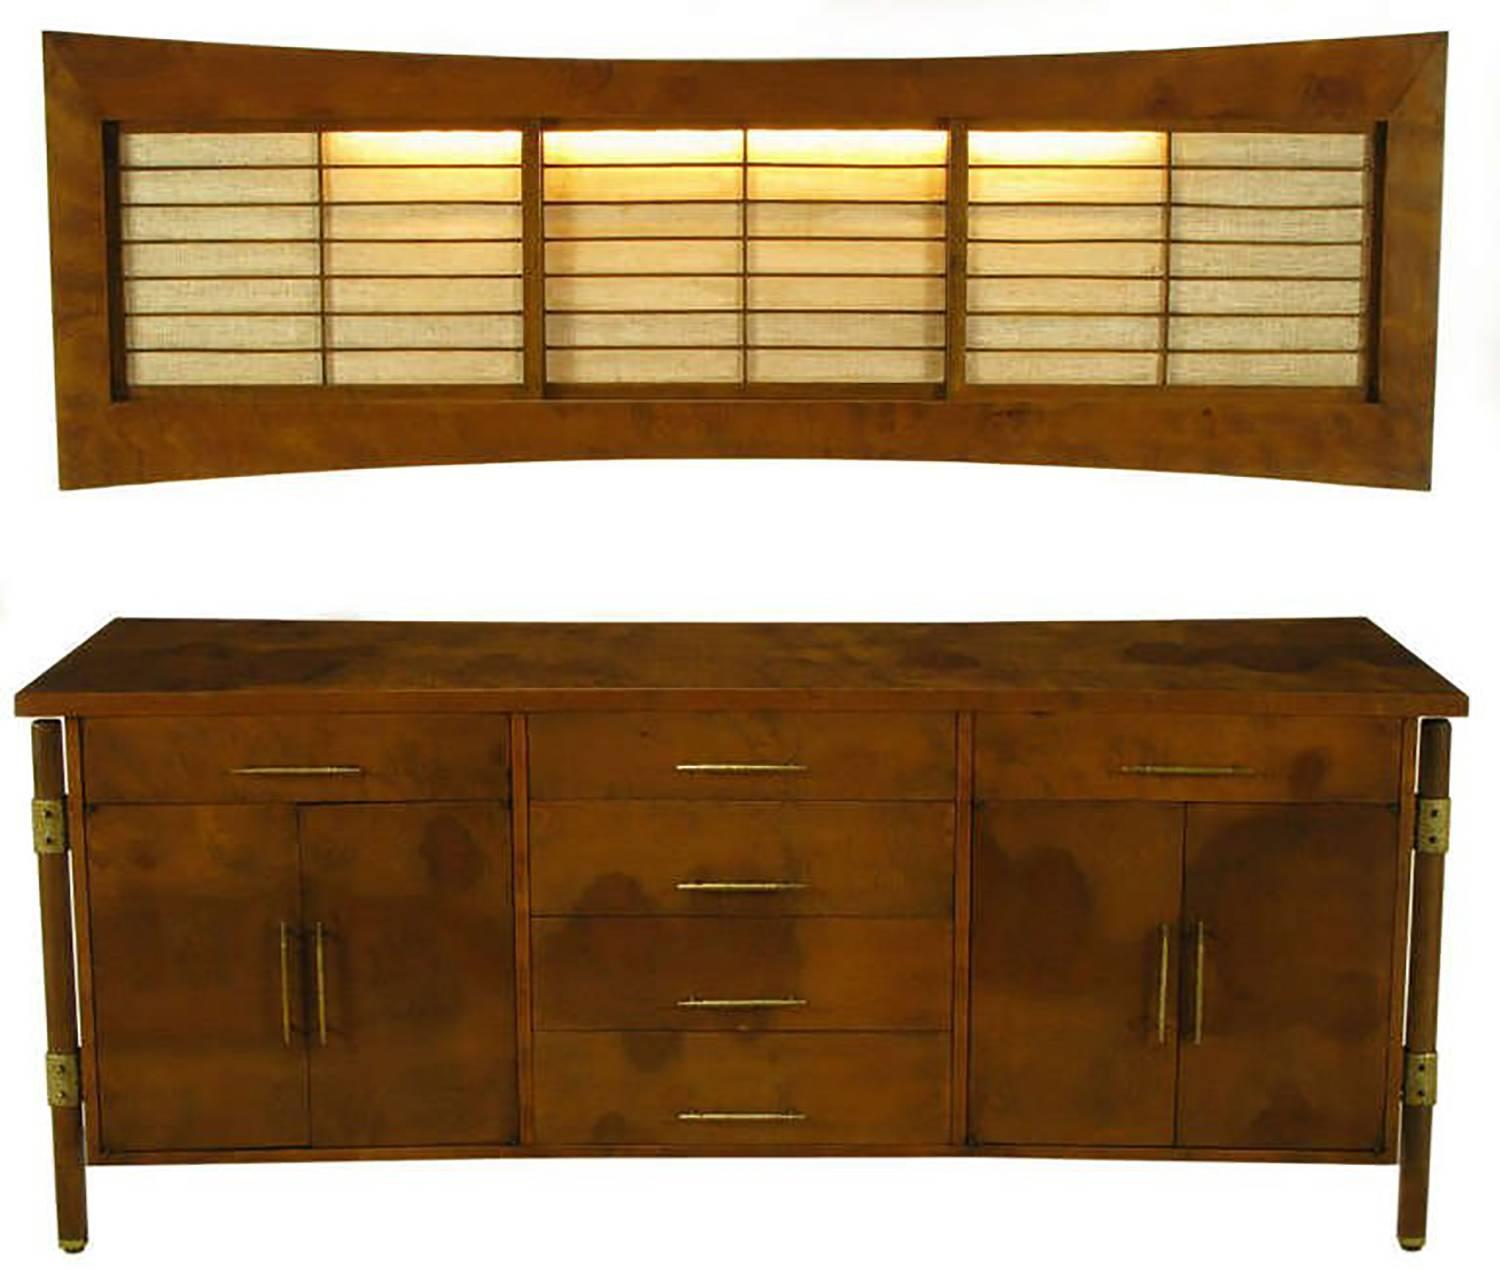 Designed by Harold M. Schwartz for Romweber. Burled walnut side board with fiddle back highlights. Brutalist textured brass hardware, including brackets connecting the outboard legs to the case. Sideboard features long pulls on the six drawers and